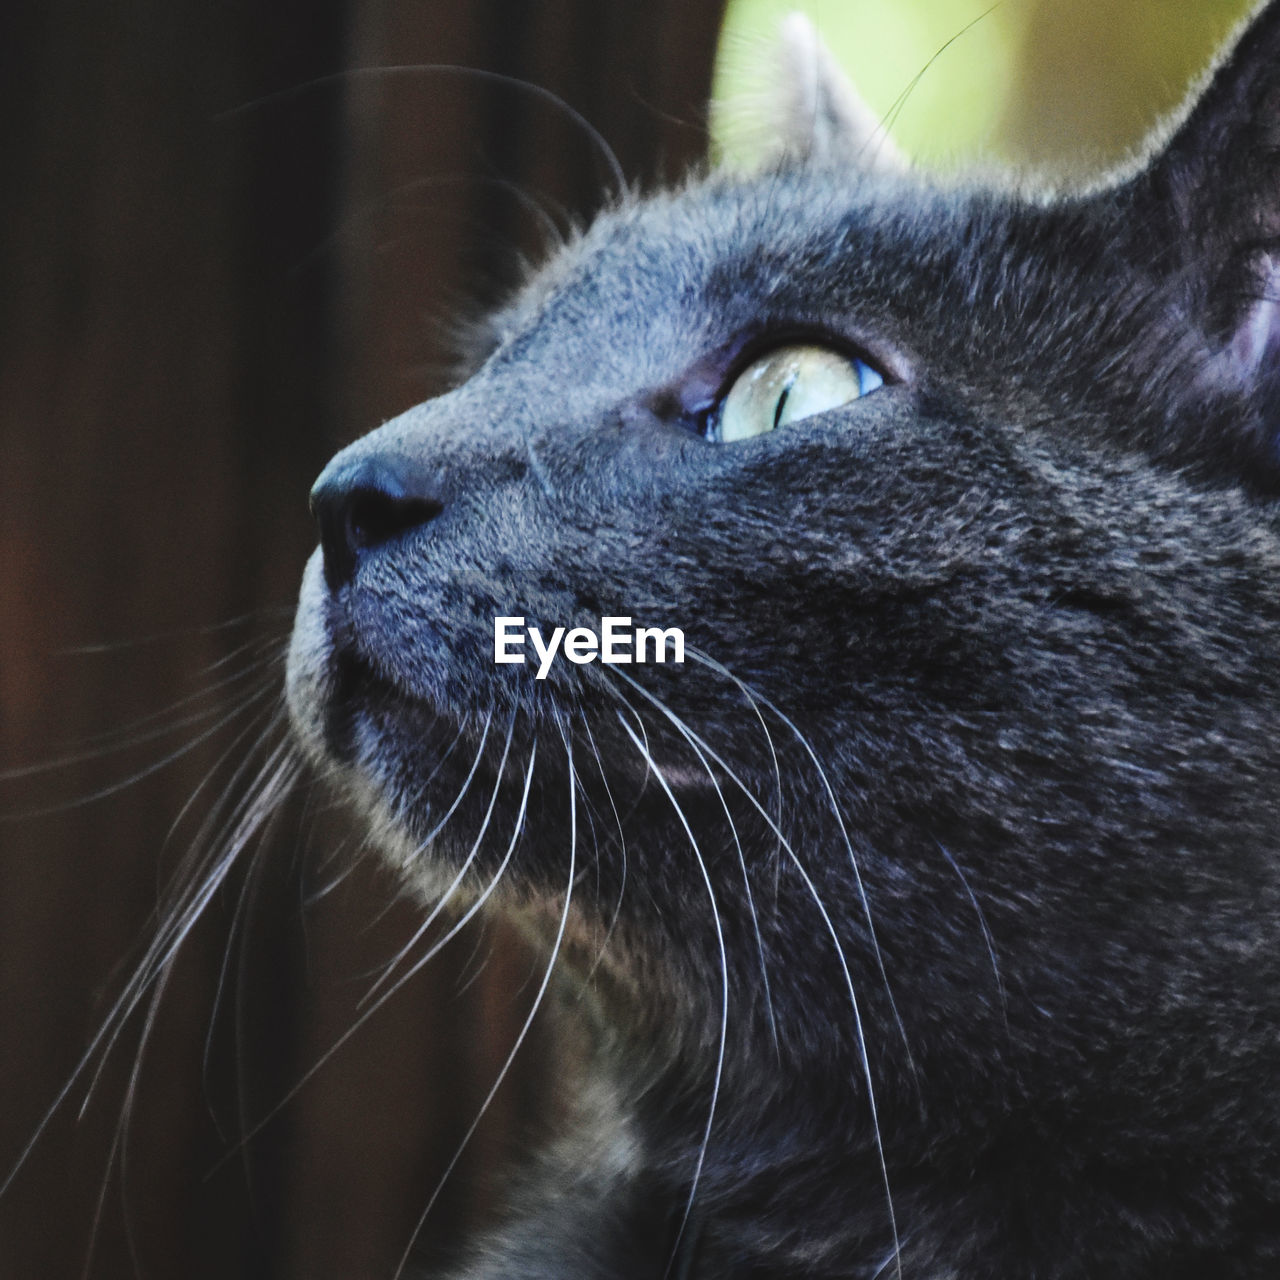 animal, animal themes, one animal, mammal, cat, pet, domestic animals, whiskers, feline, close-up, domestic cat, animal body part, animal head, nose, small to medium-sized cats, black, felidae, snout, no people, looking, looking away, focus on foreground, black cat, eye, animal eye